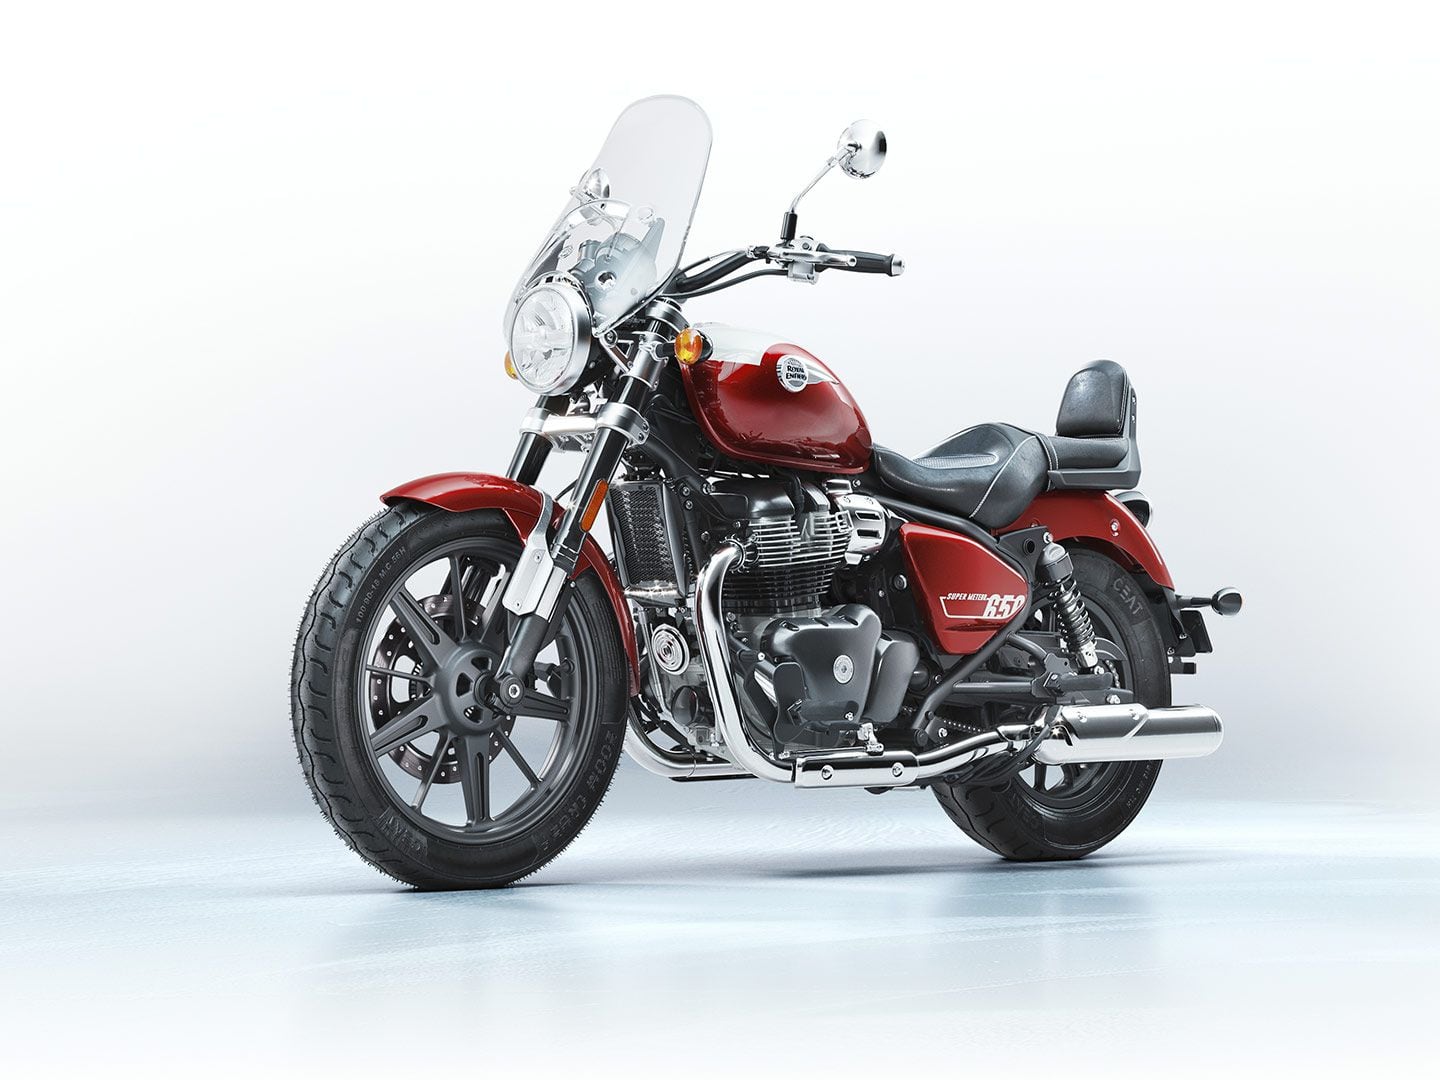 The Super Meteor 650 Tourer comes with a windscreen, deluxe touring seat, and a pillion backrest.